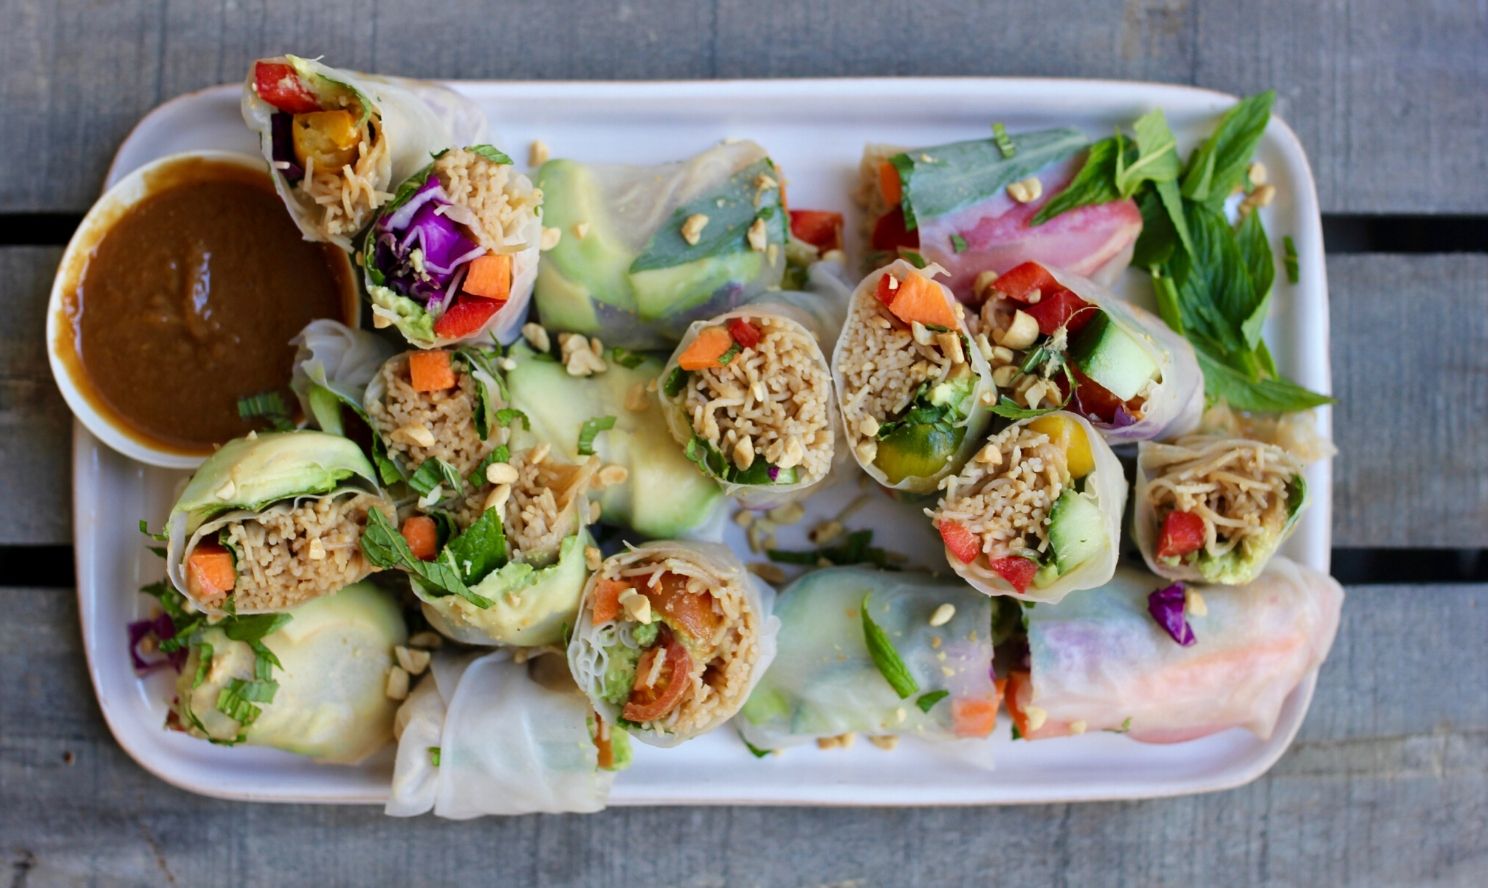 Rice Paper Rolls with Peanut Dipping Sauce, Recipe